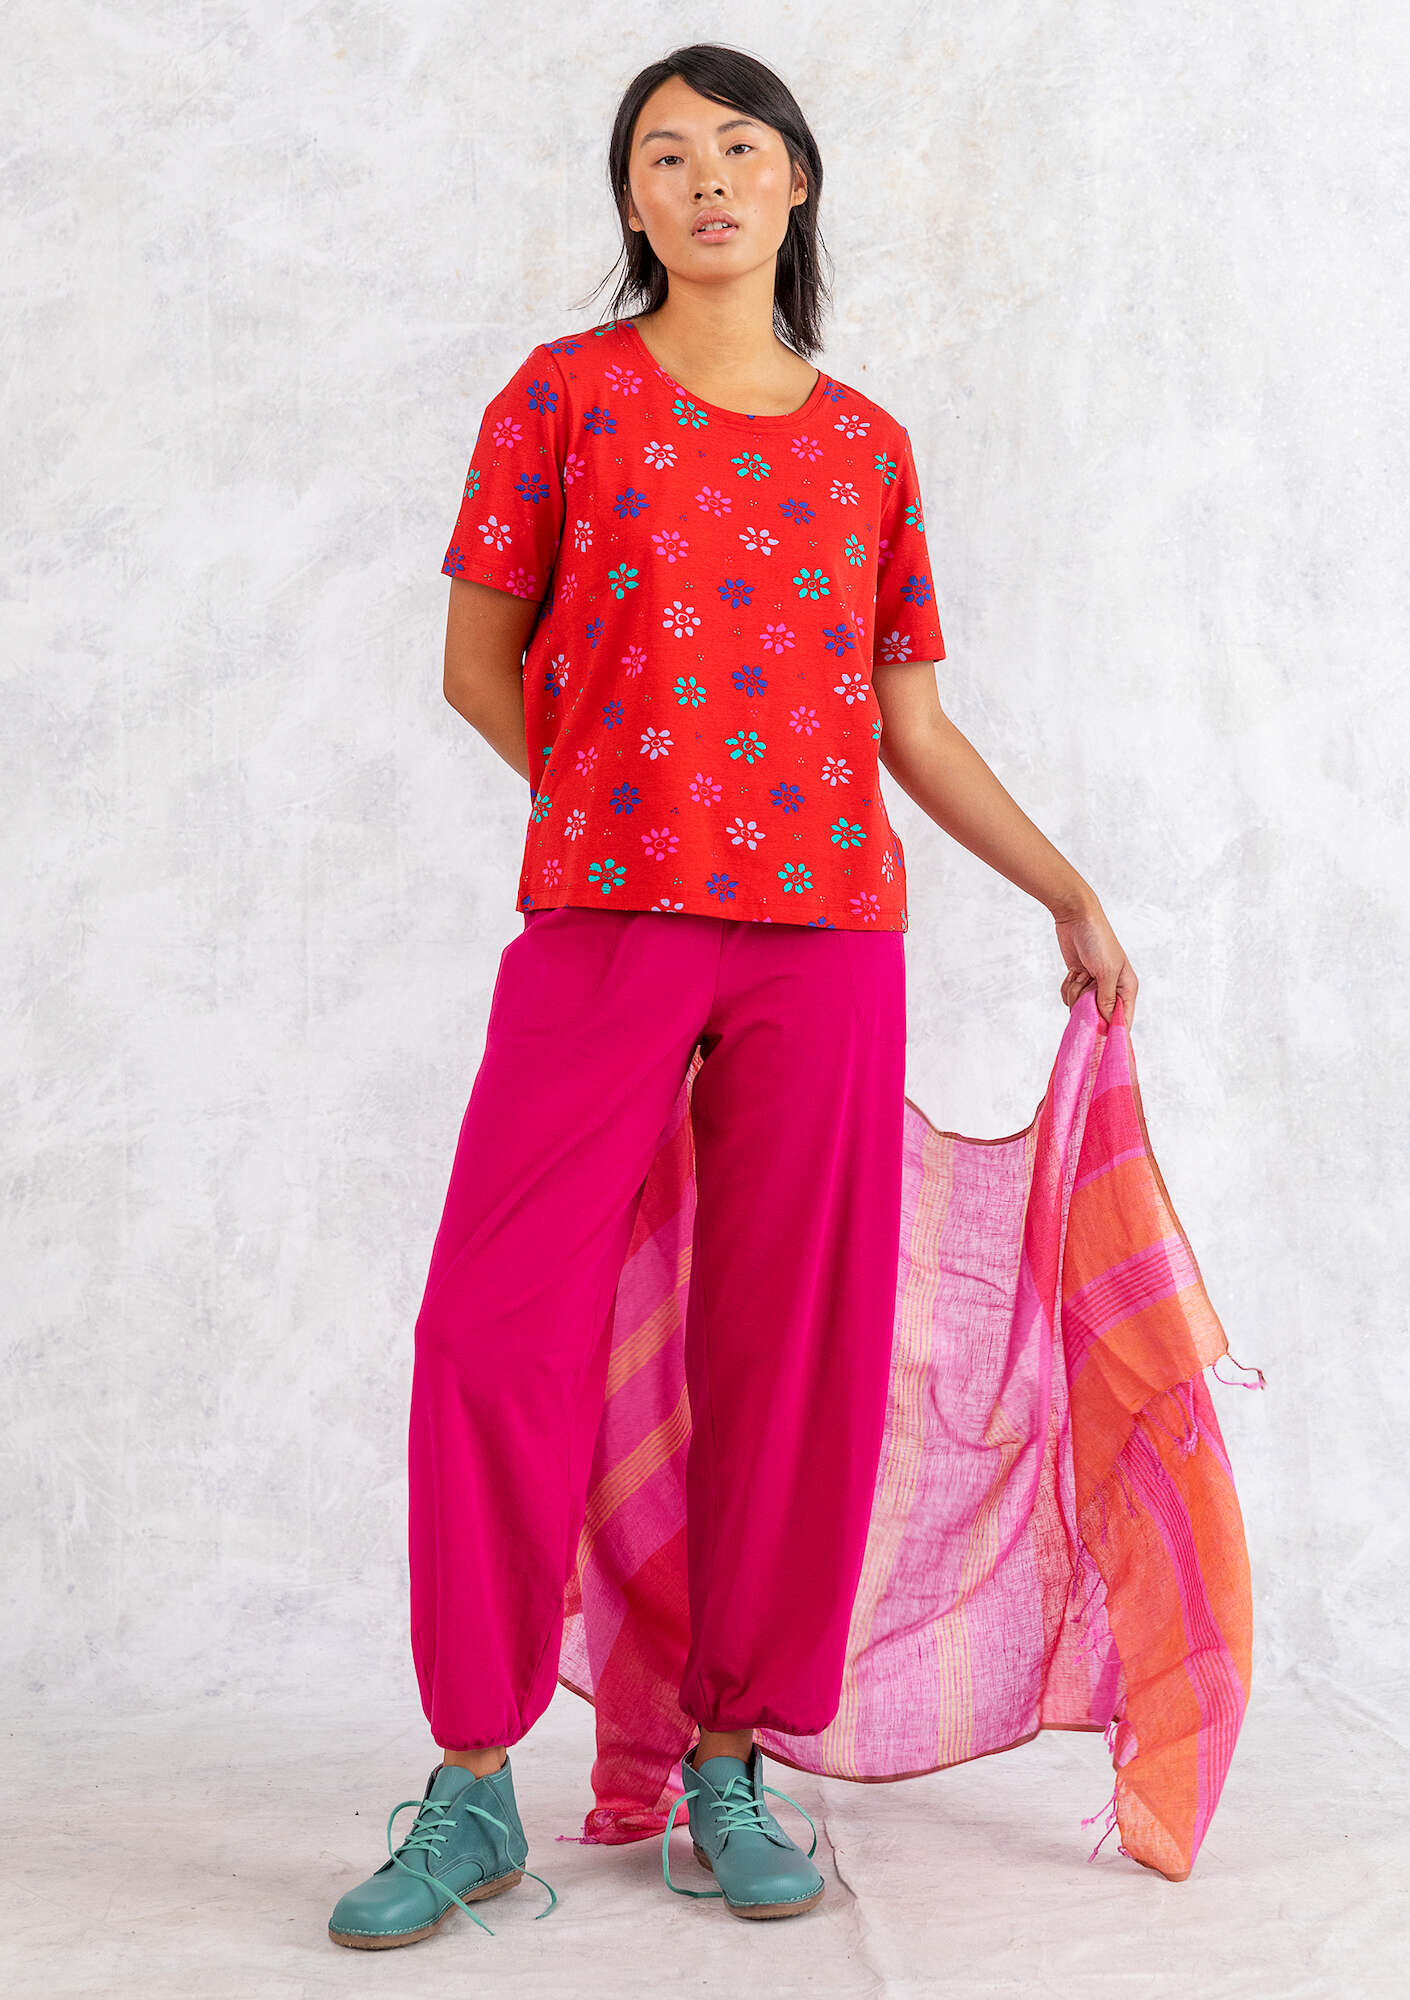 “Ester” T-shirt in organic cotton/spandex parrot red/patterned thumbnail